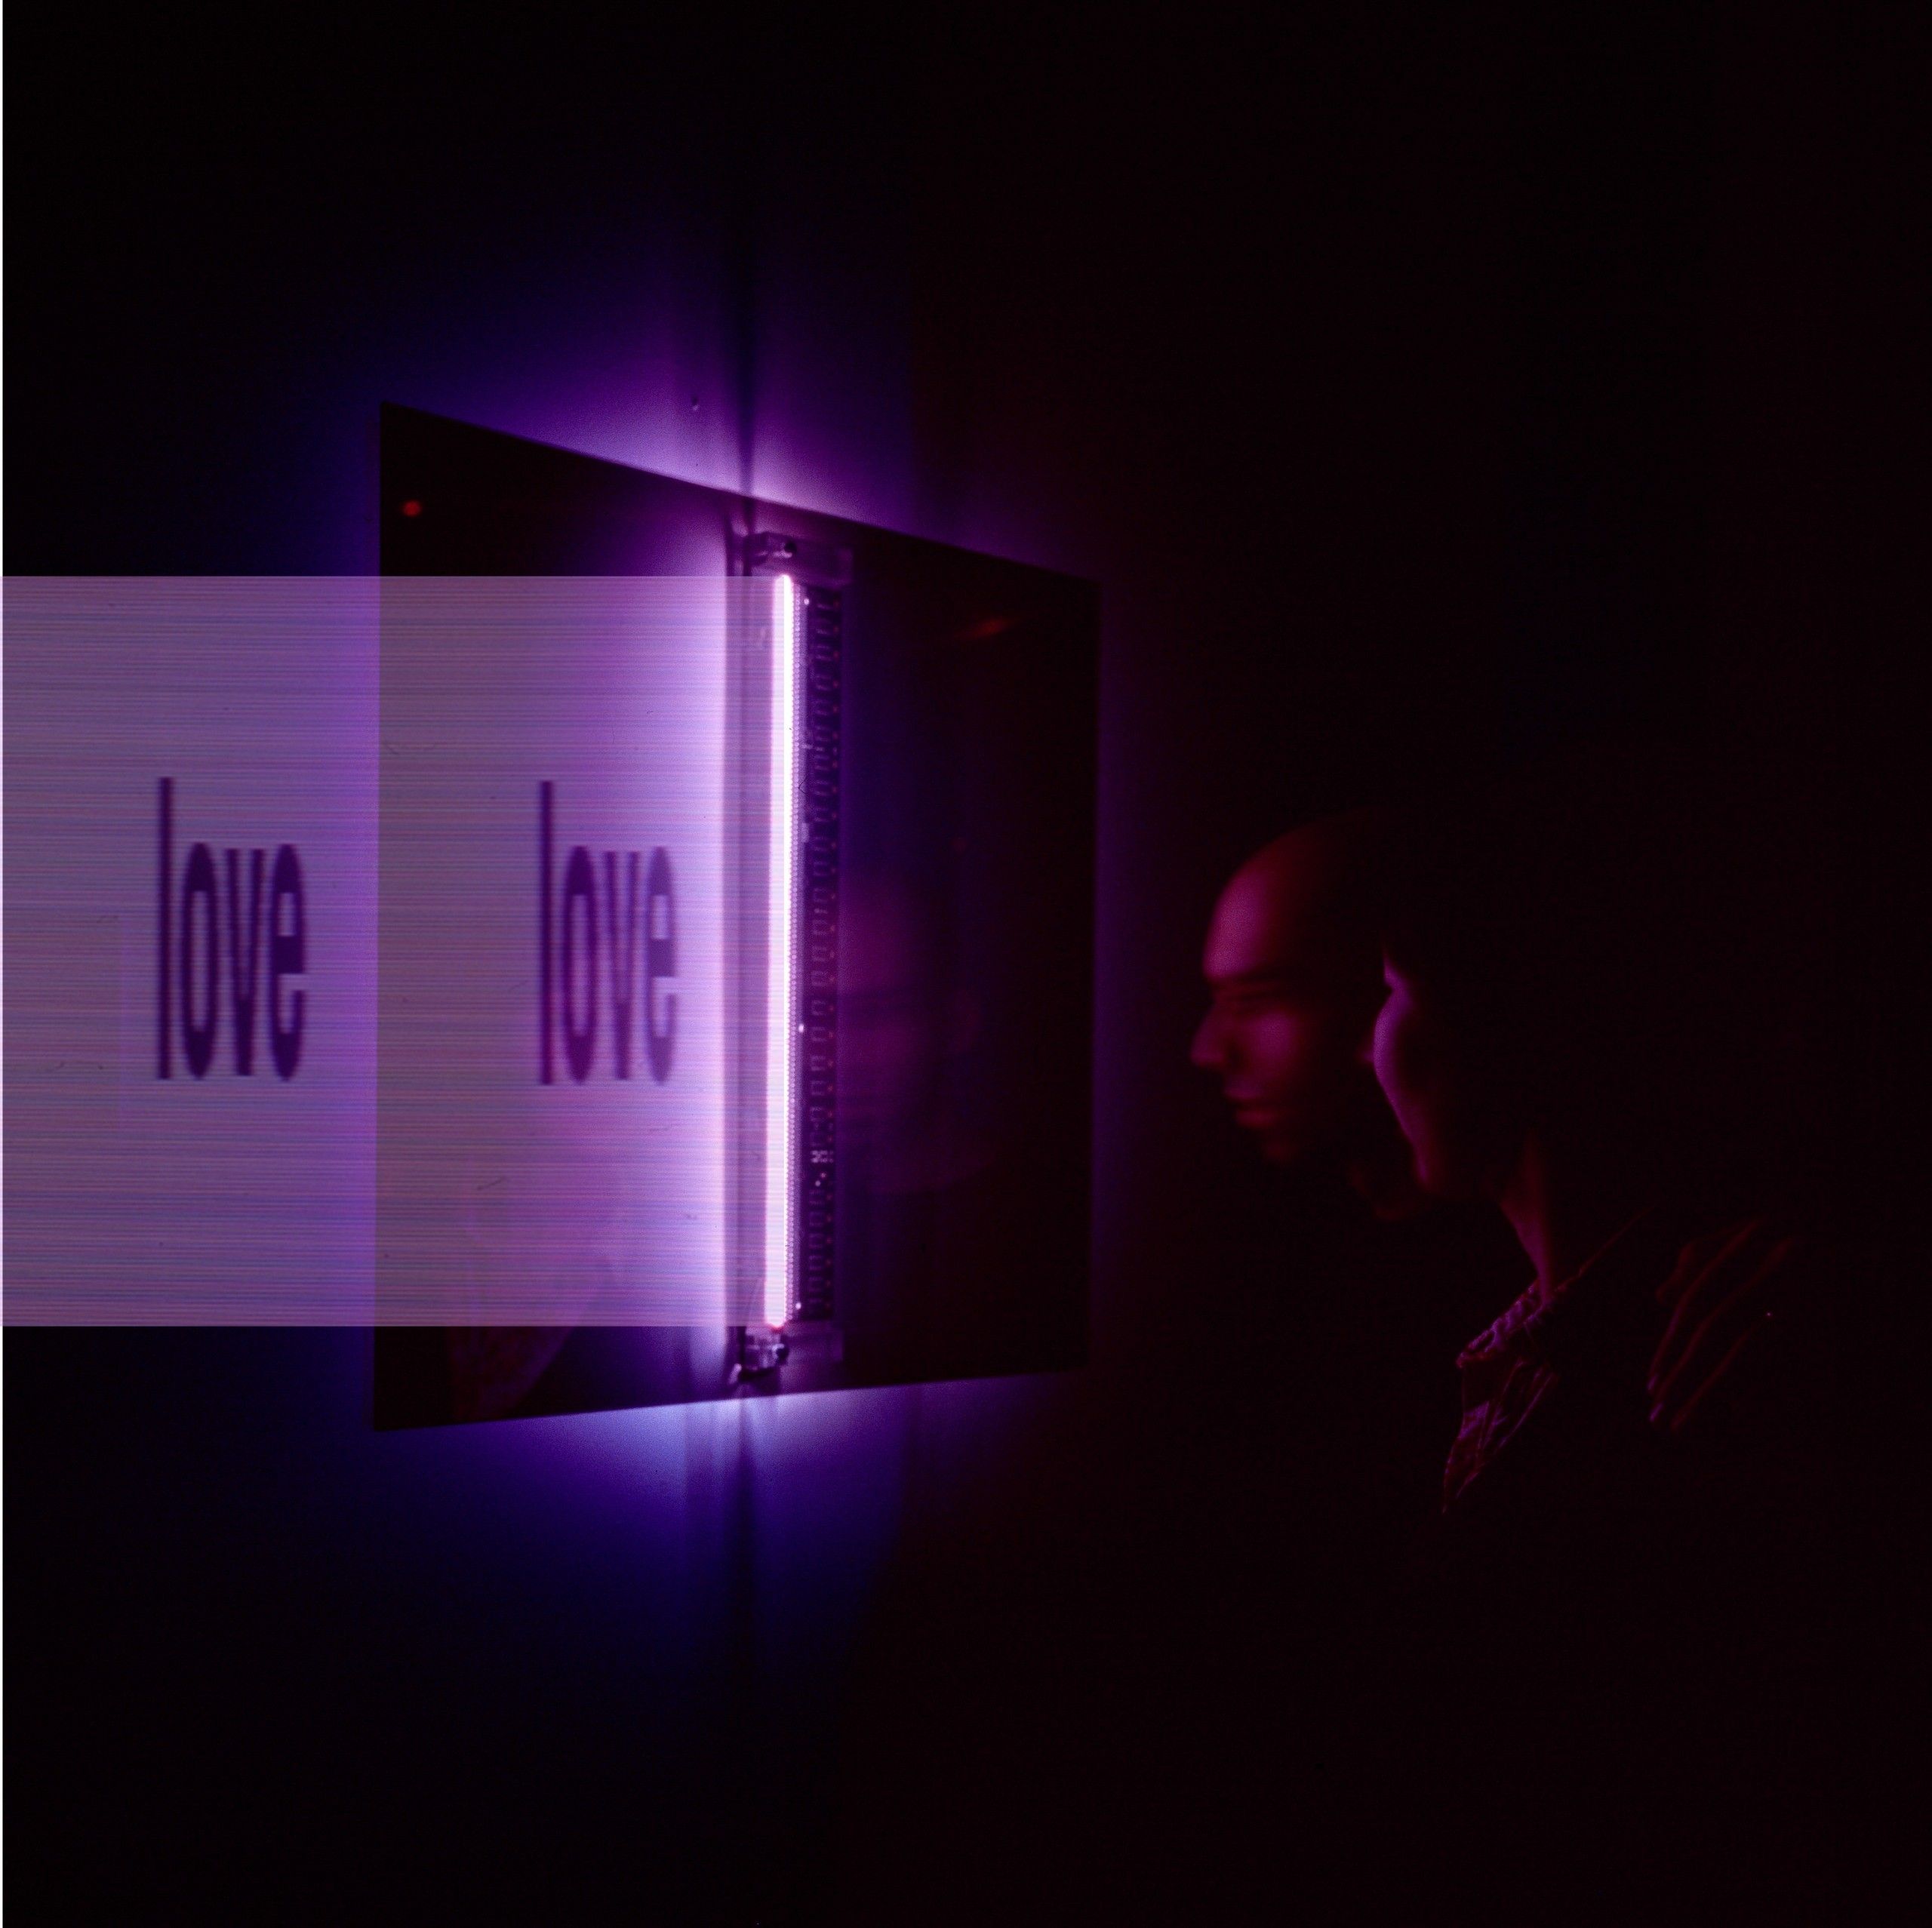 Light is Love (2018 Colour Edition) by Chris Levine - Secondary Image